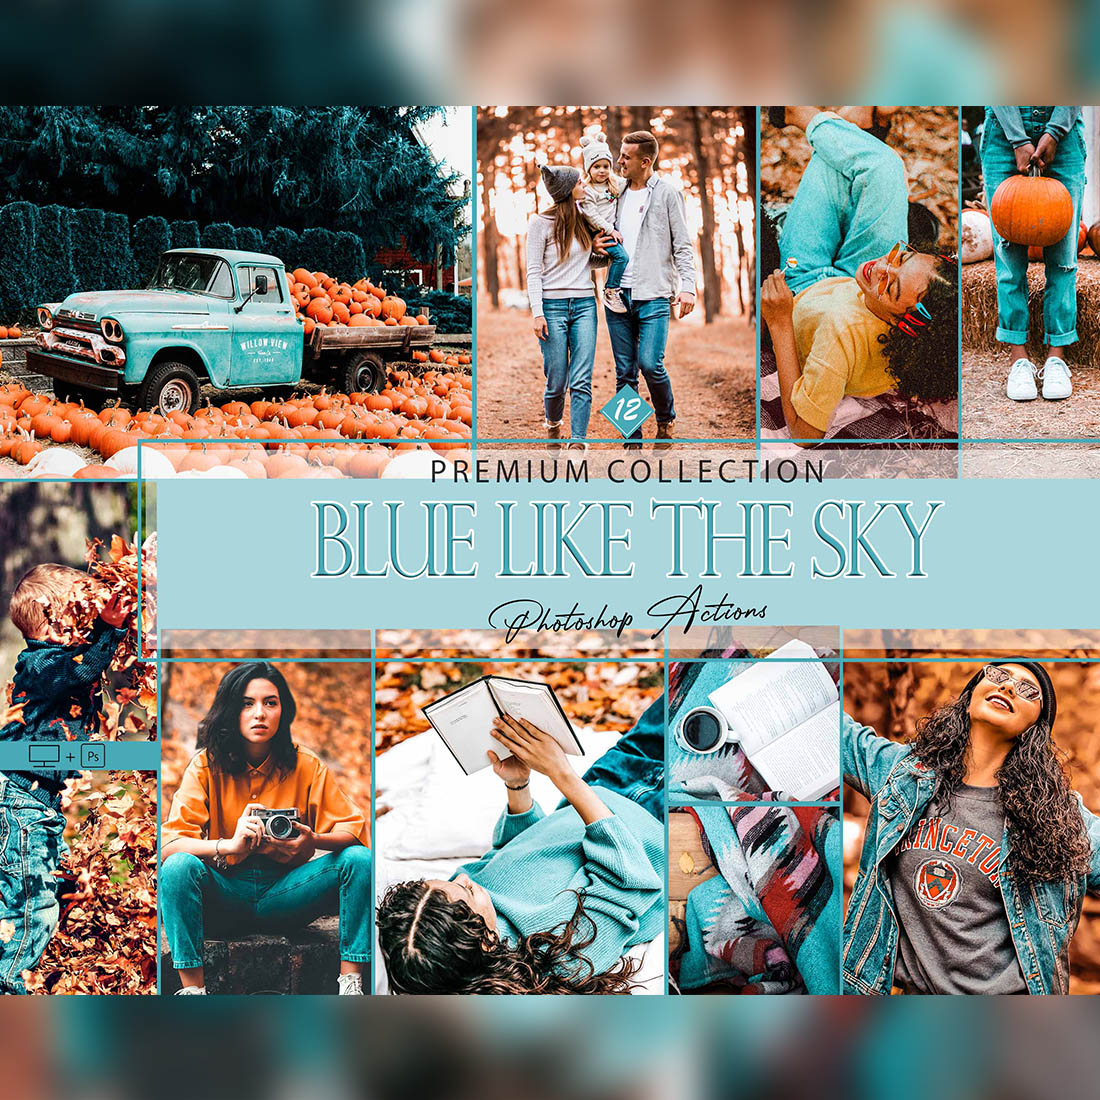 12 Photoshop Actions, Blue Like The Sky Ps Action, Autumn ACR Preset, Saturation Filter, Lifestyle Theme For Instagram,Top Theme, Fall Blogger cover image.